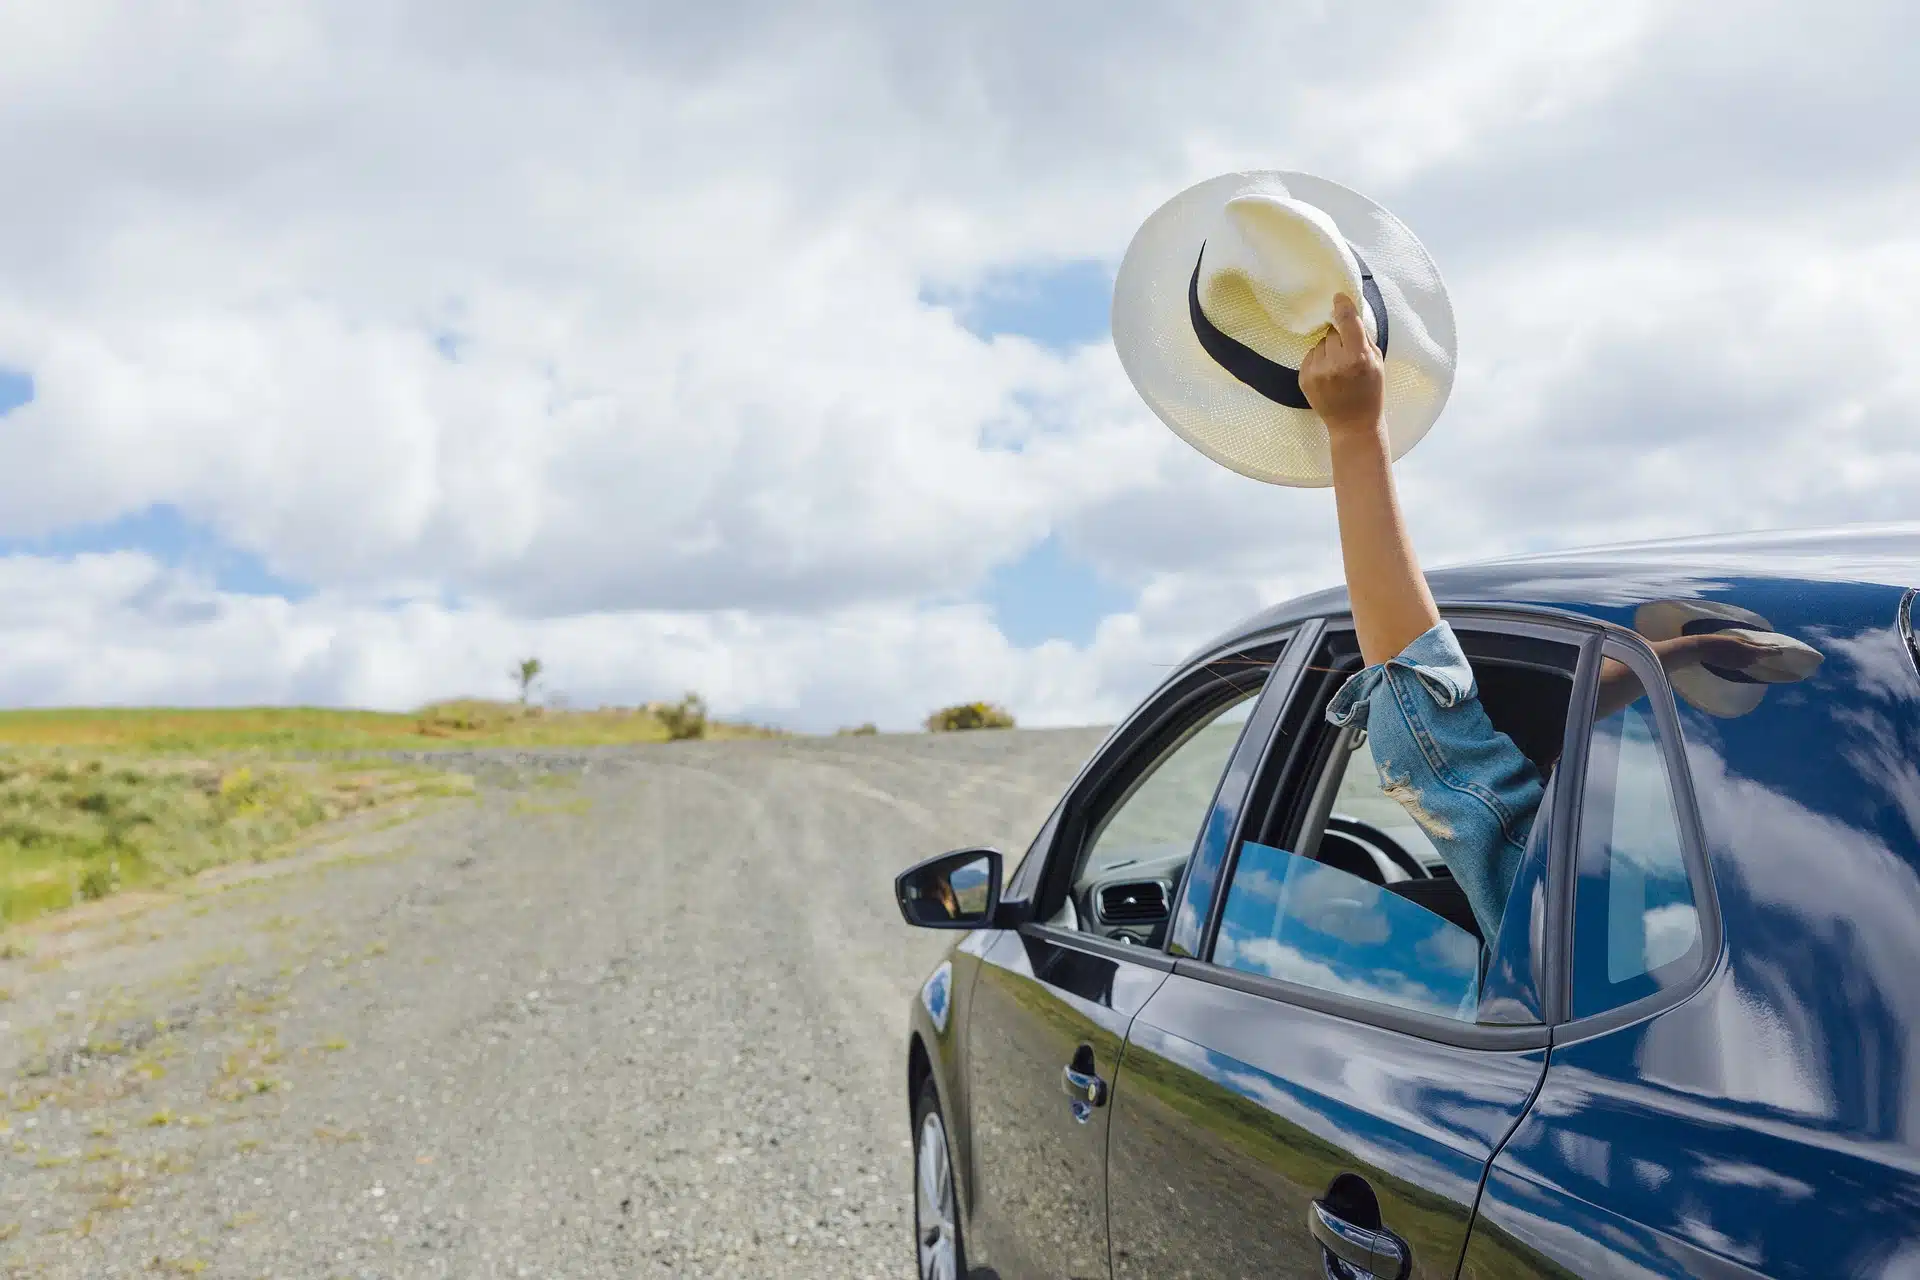 Make sure you pack snacks and a first aid kit for your family road trip.